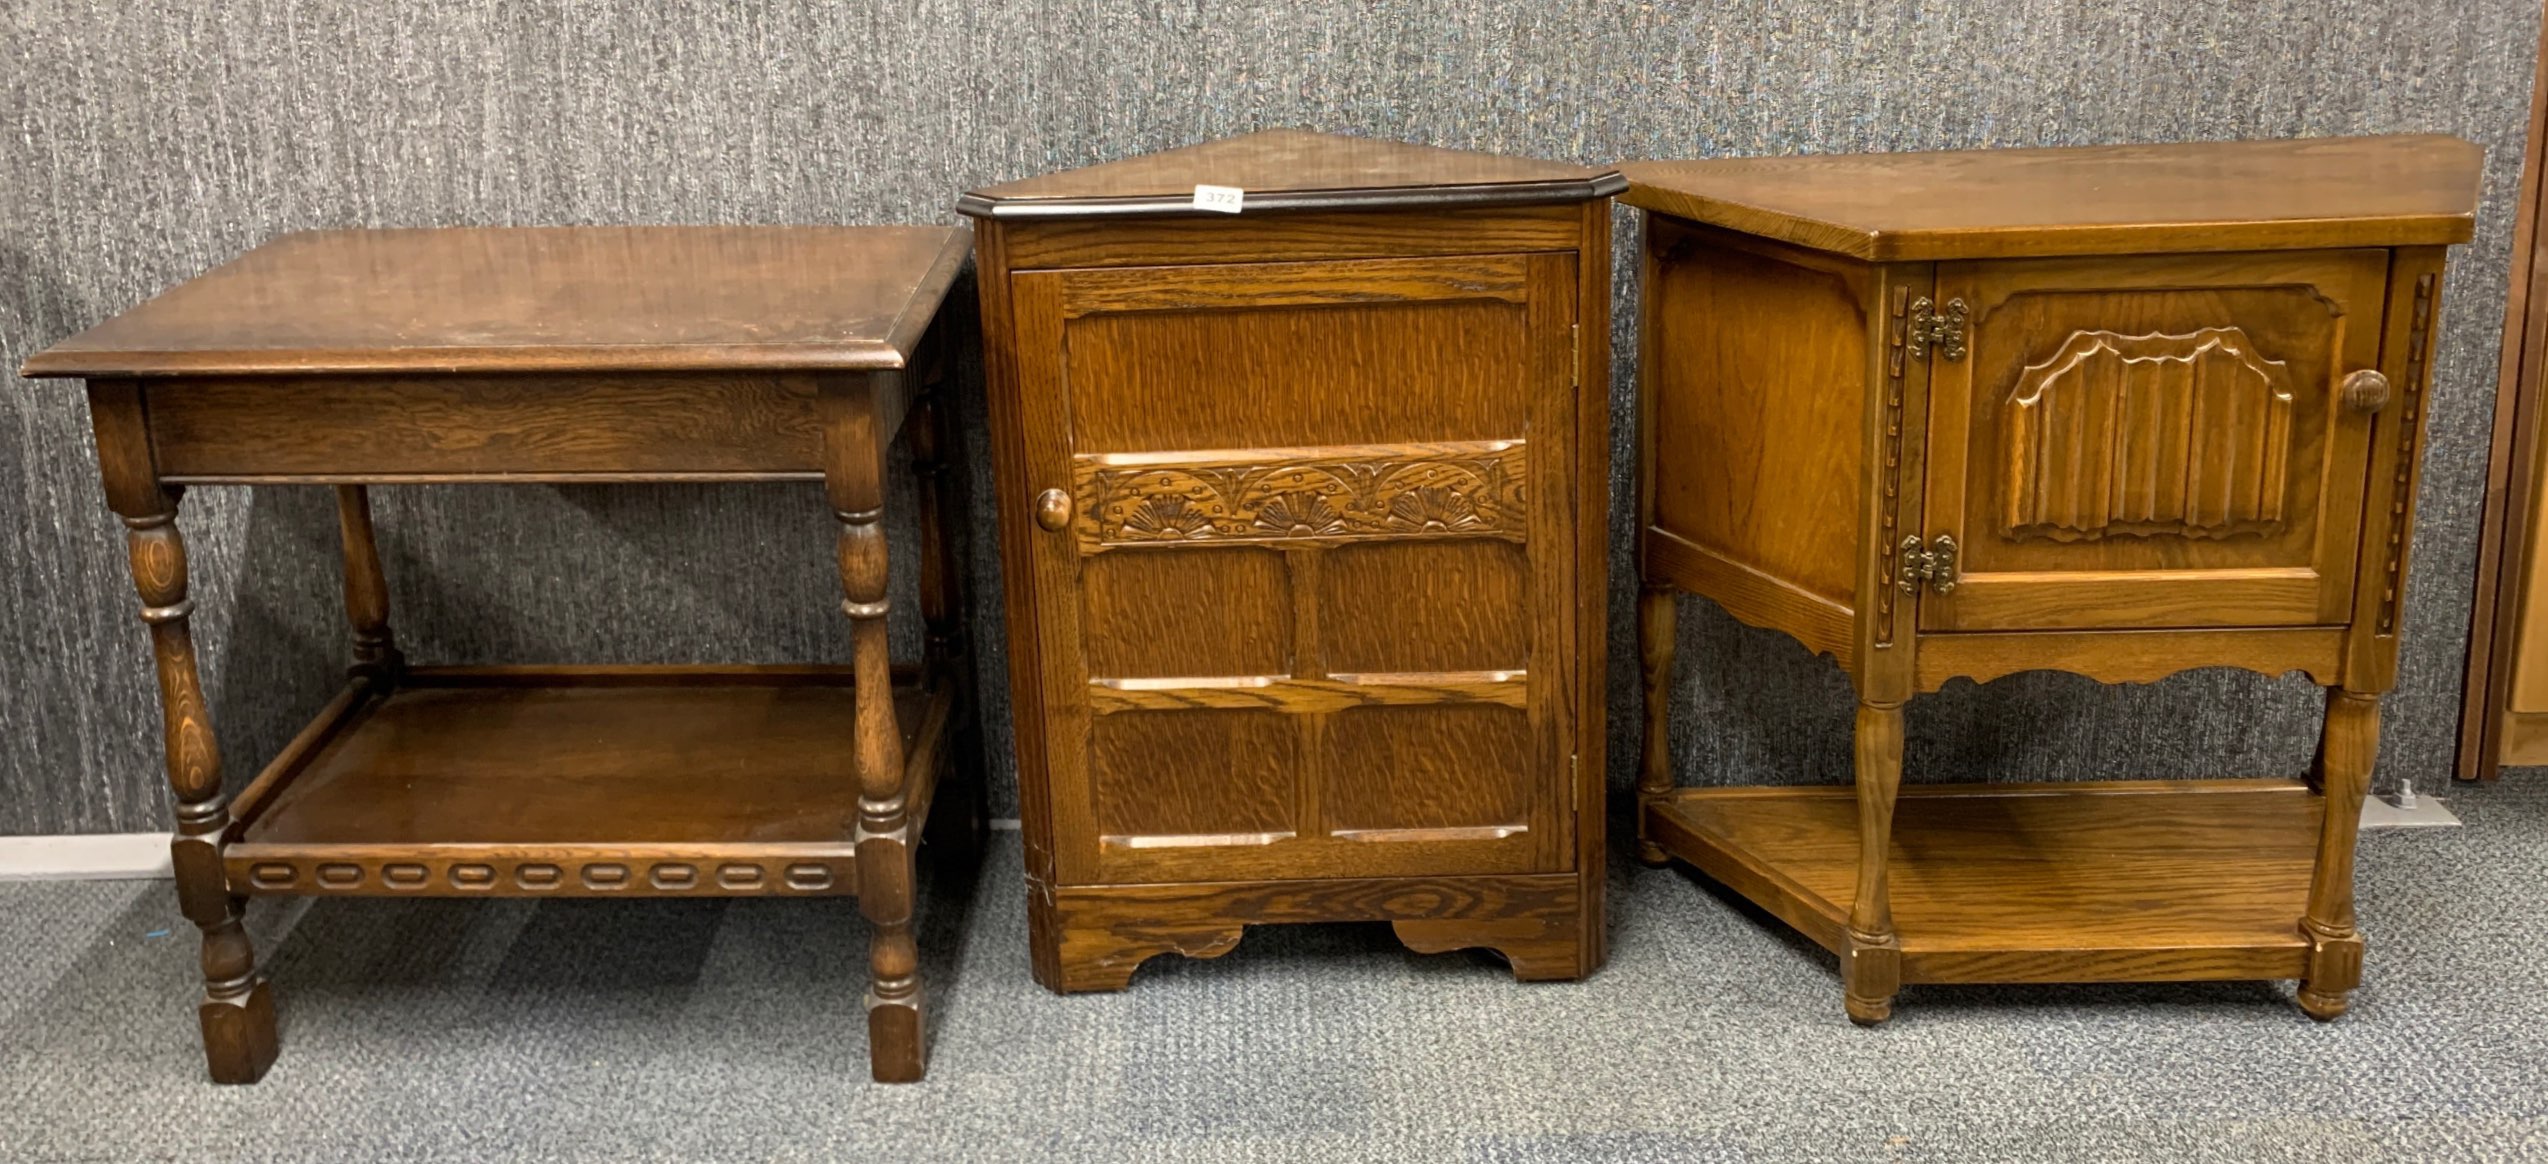 A carved oak hall cabinet, corner cabinet and trolley, hall cabinet size 75 x 33 x 72cm.